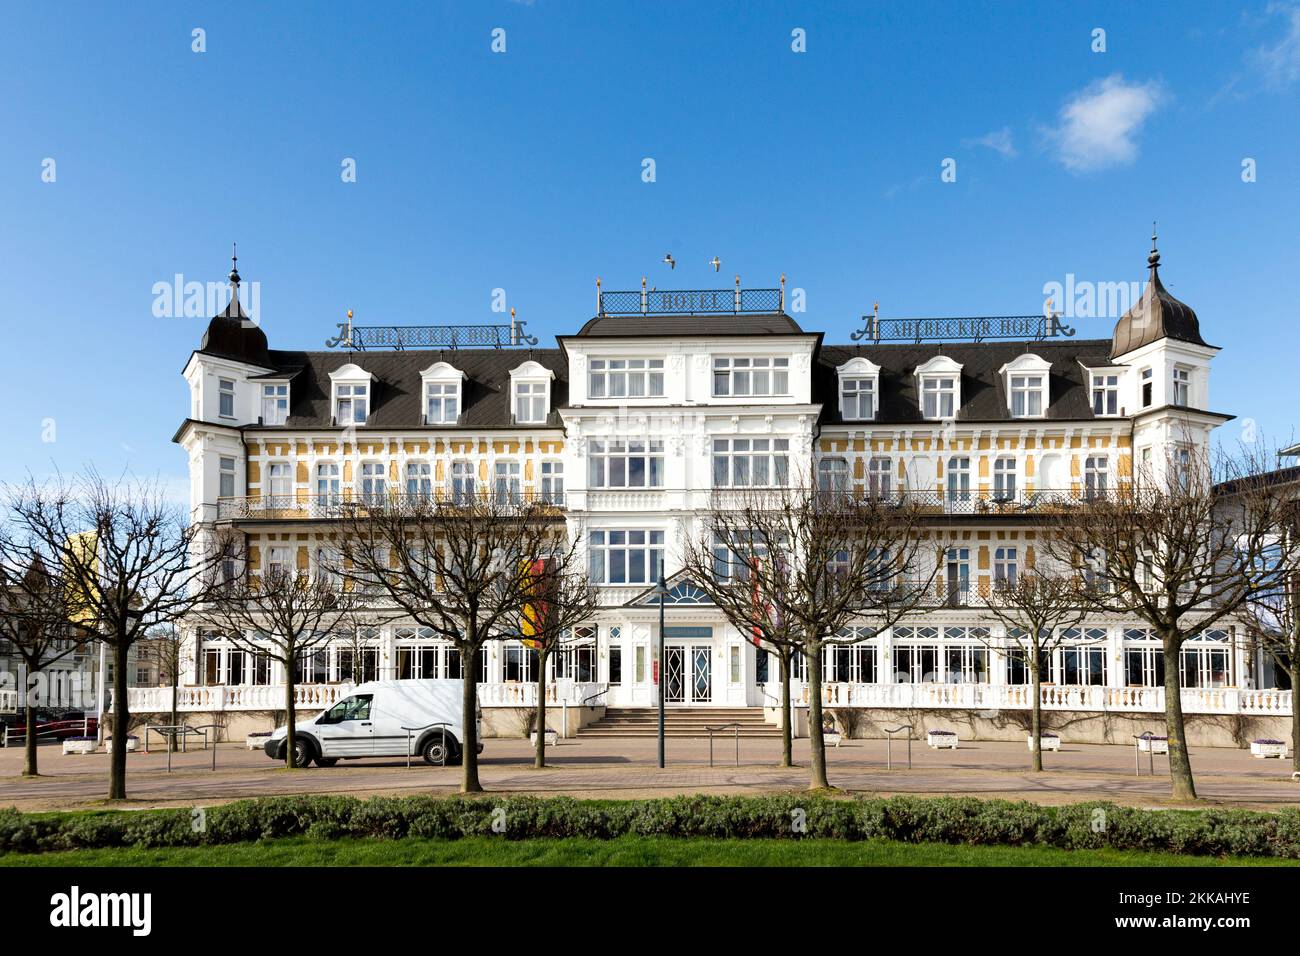 Ahlbeck, Germany - April 15, 2014: famous historic haus Ahlbecker Hof at the promenade of Ahlbeck. Stock Photo